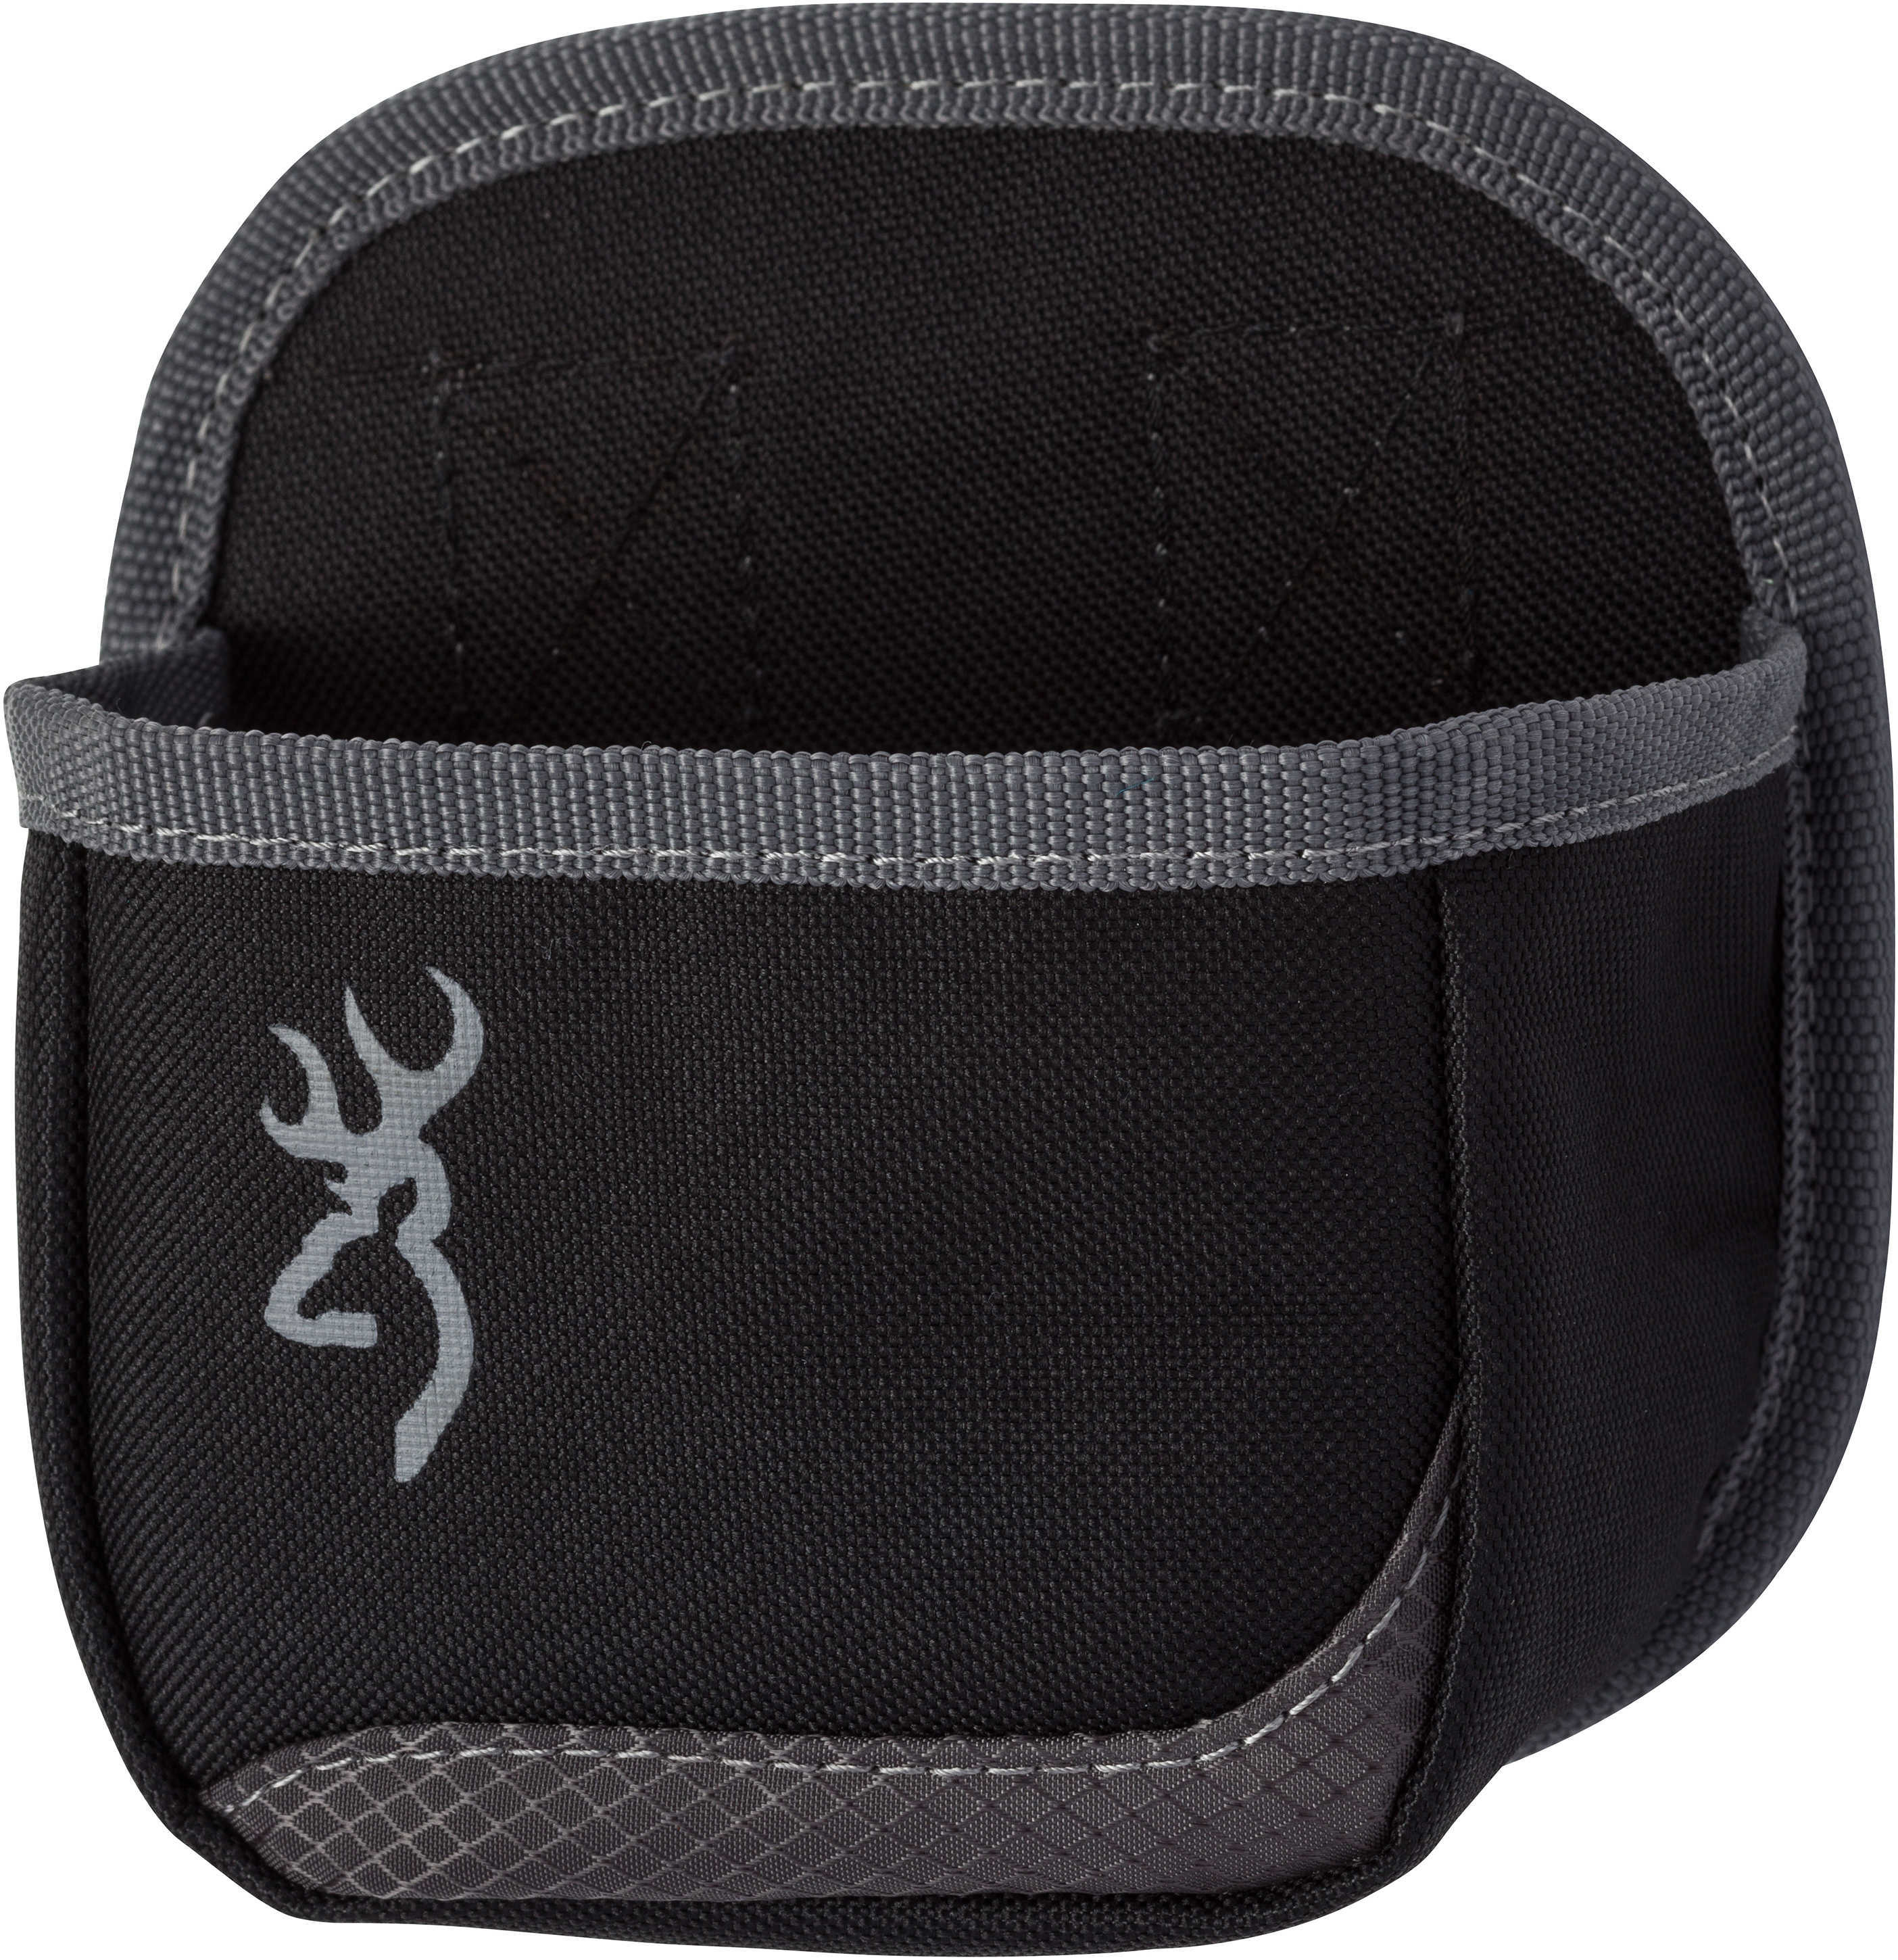 Browning Flash Shell Box Carrier, Black/Gray Md: 121062693